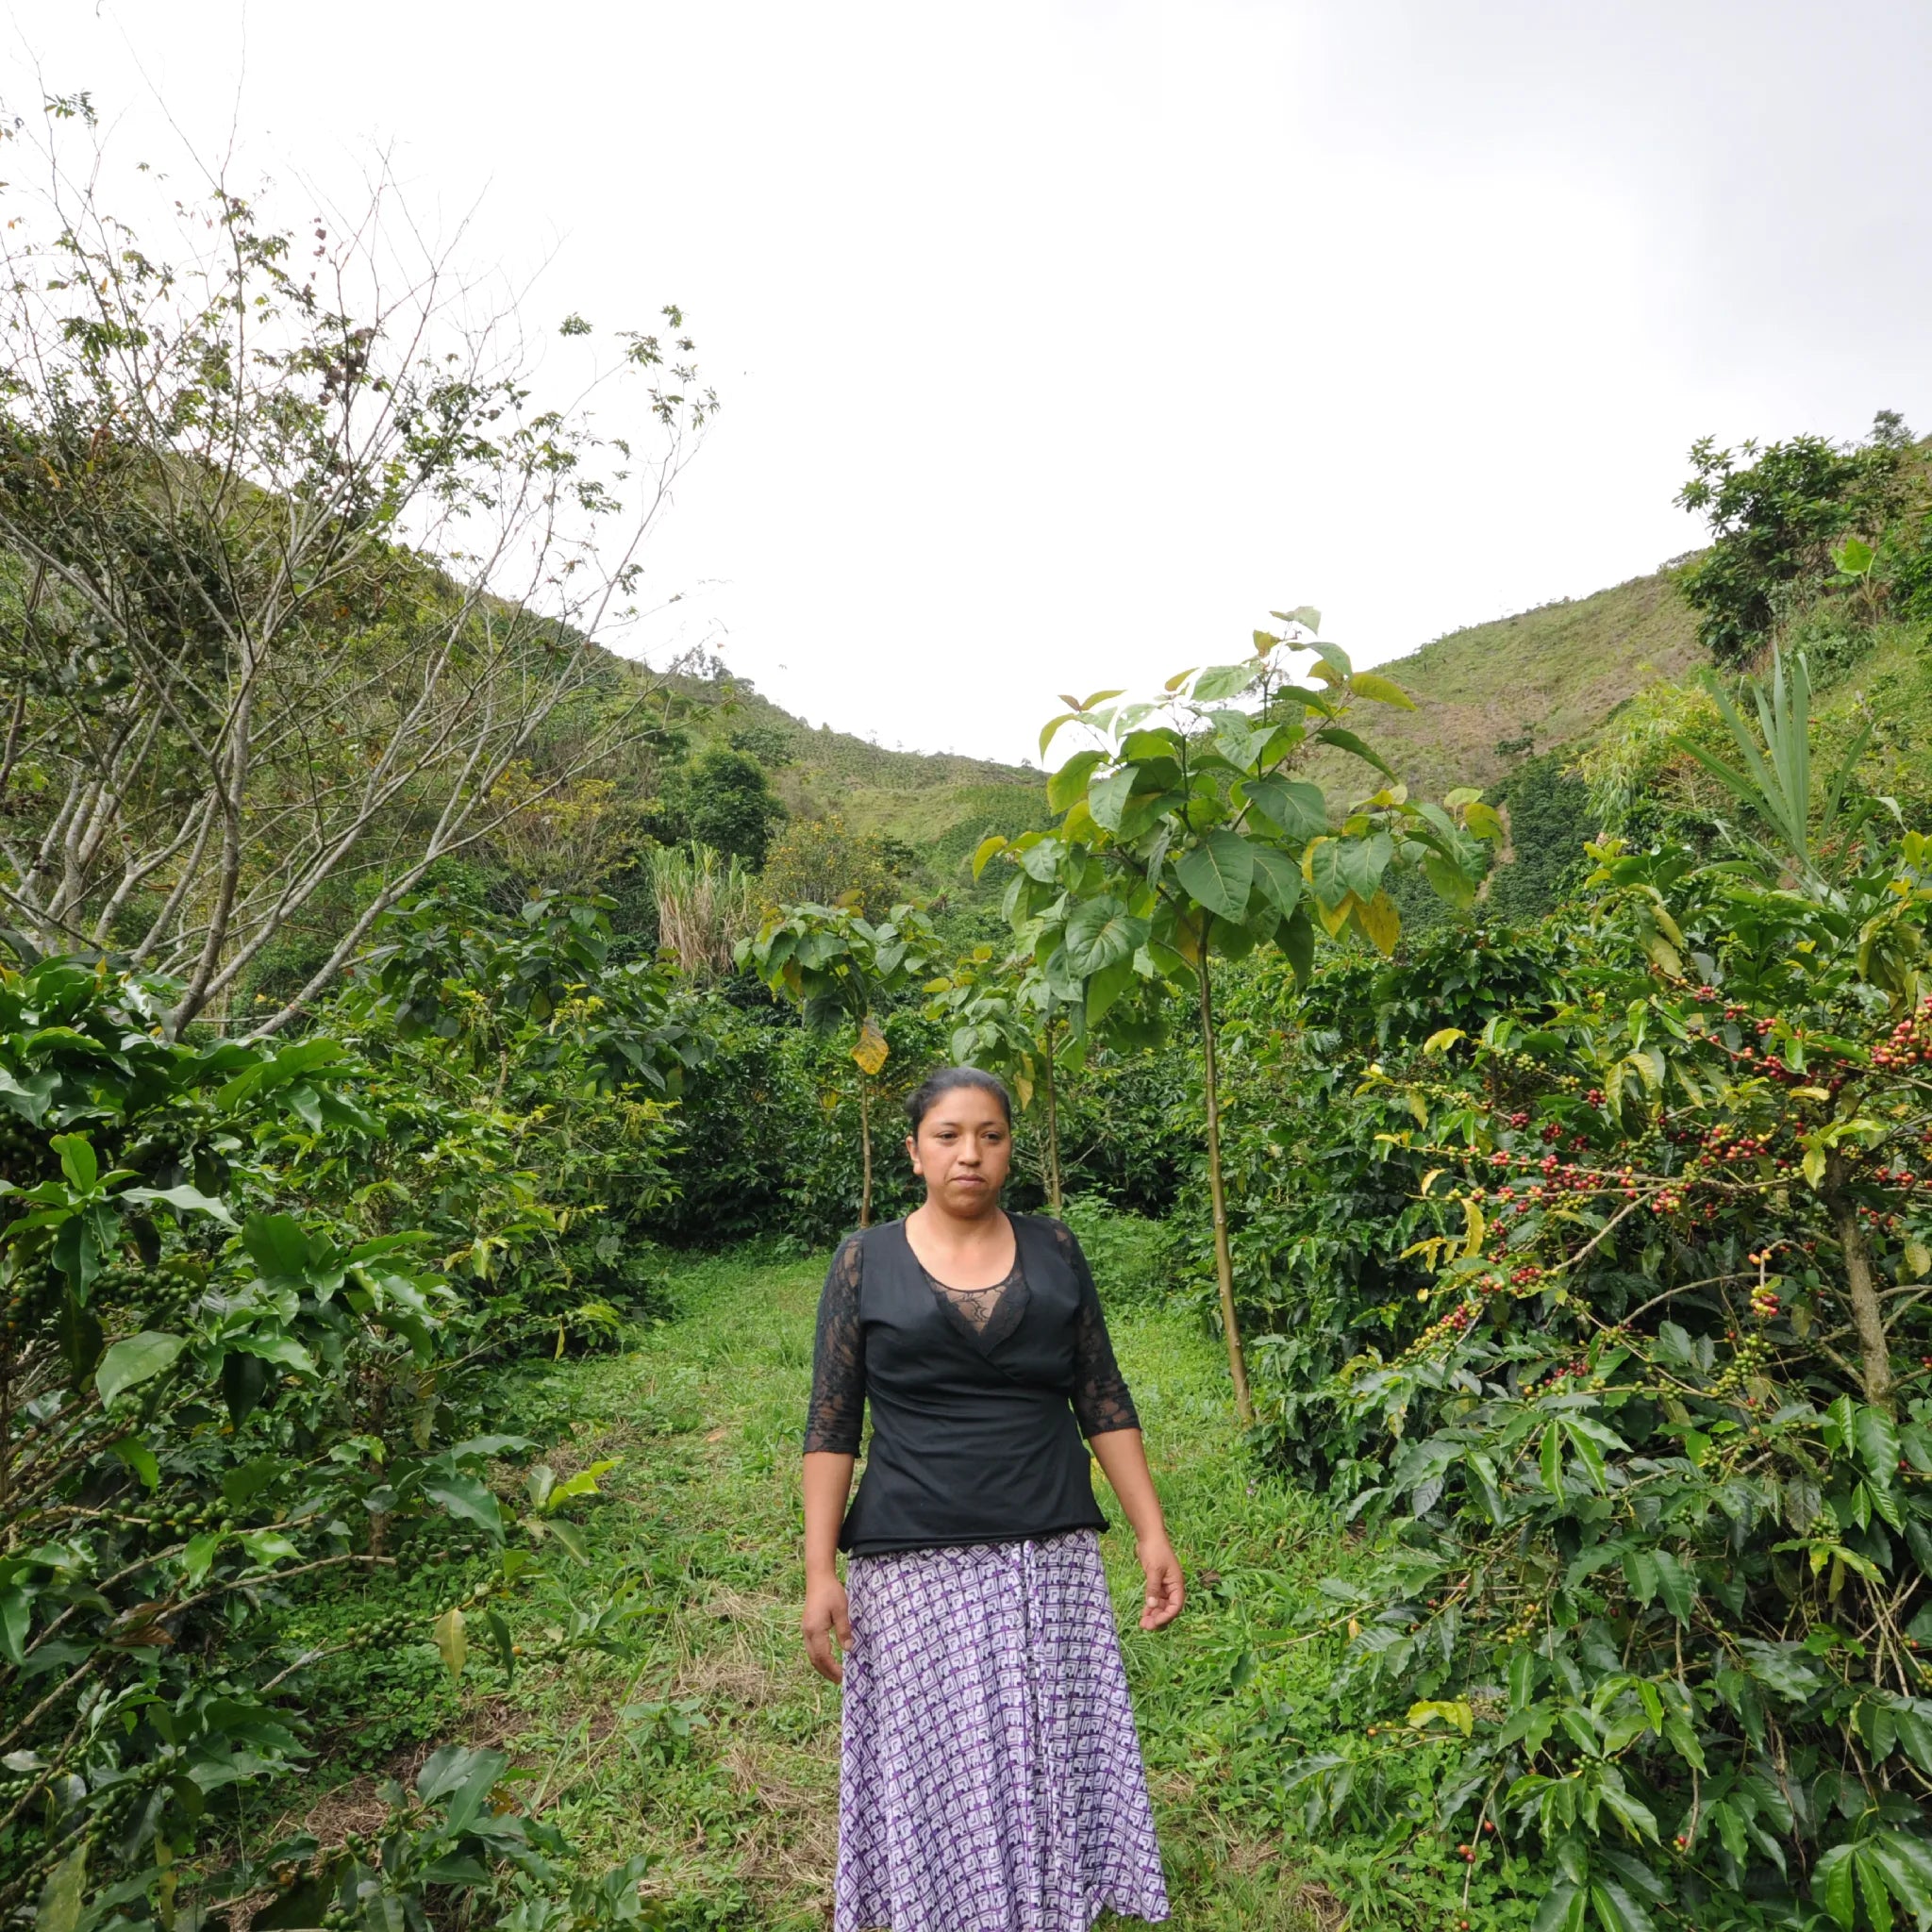 A farmer in Colombia, part of the group that grew Glen Lyon Coffee Roasters' Colombia Andino speciality coffee, poses amongst their coffee trees